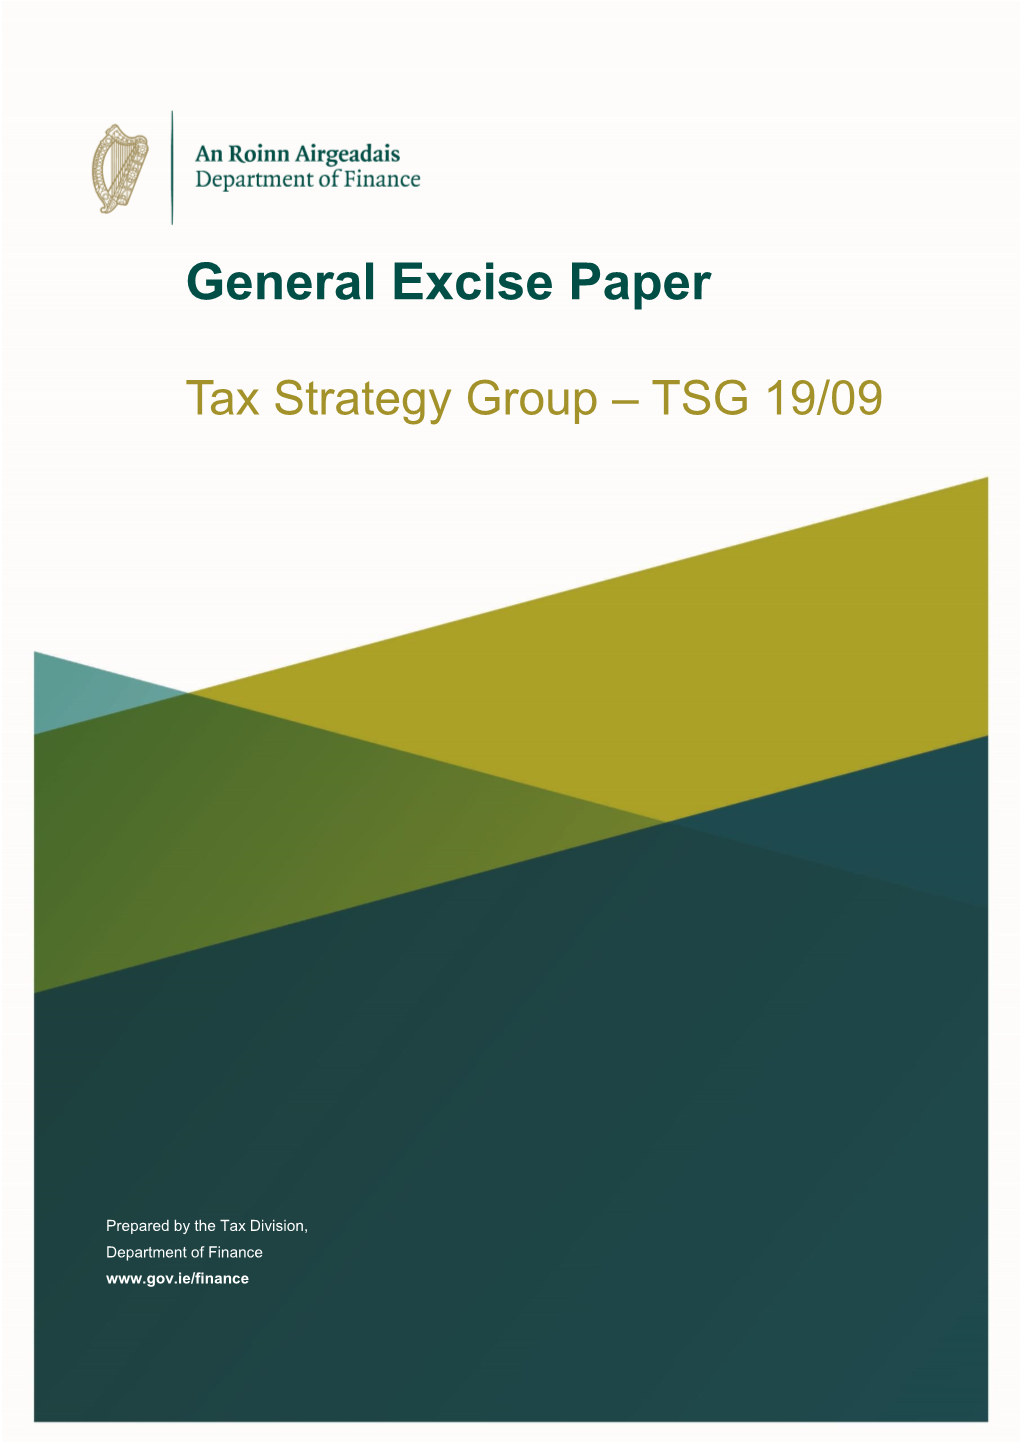 General Excise Paper